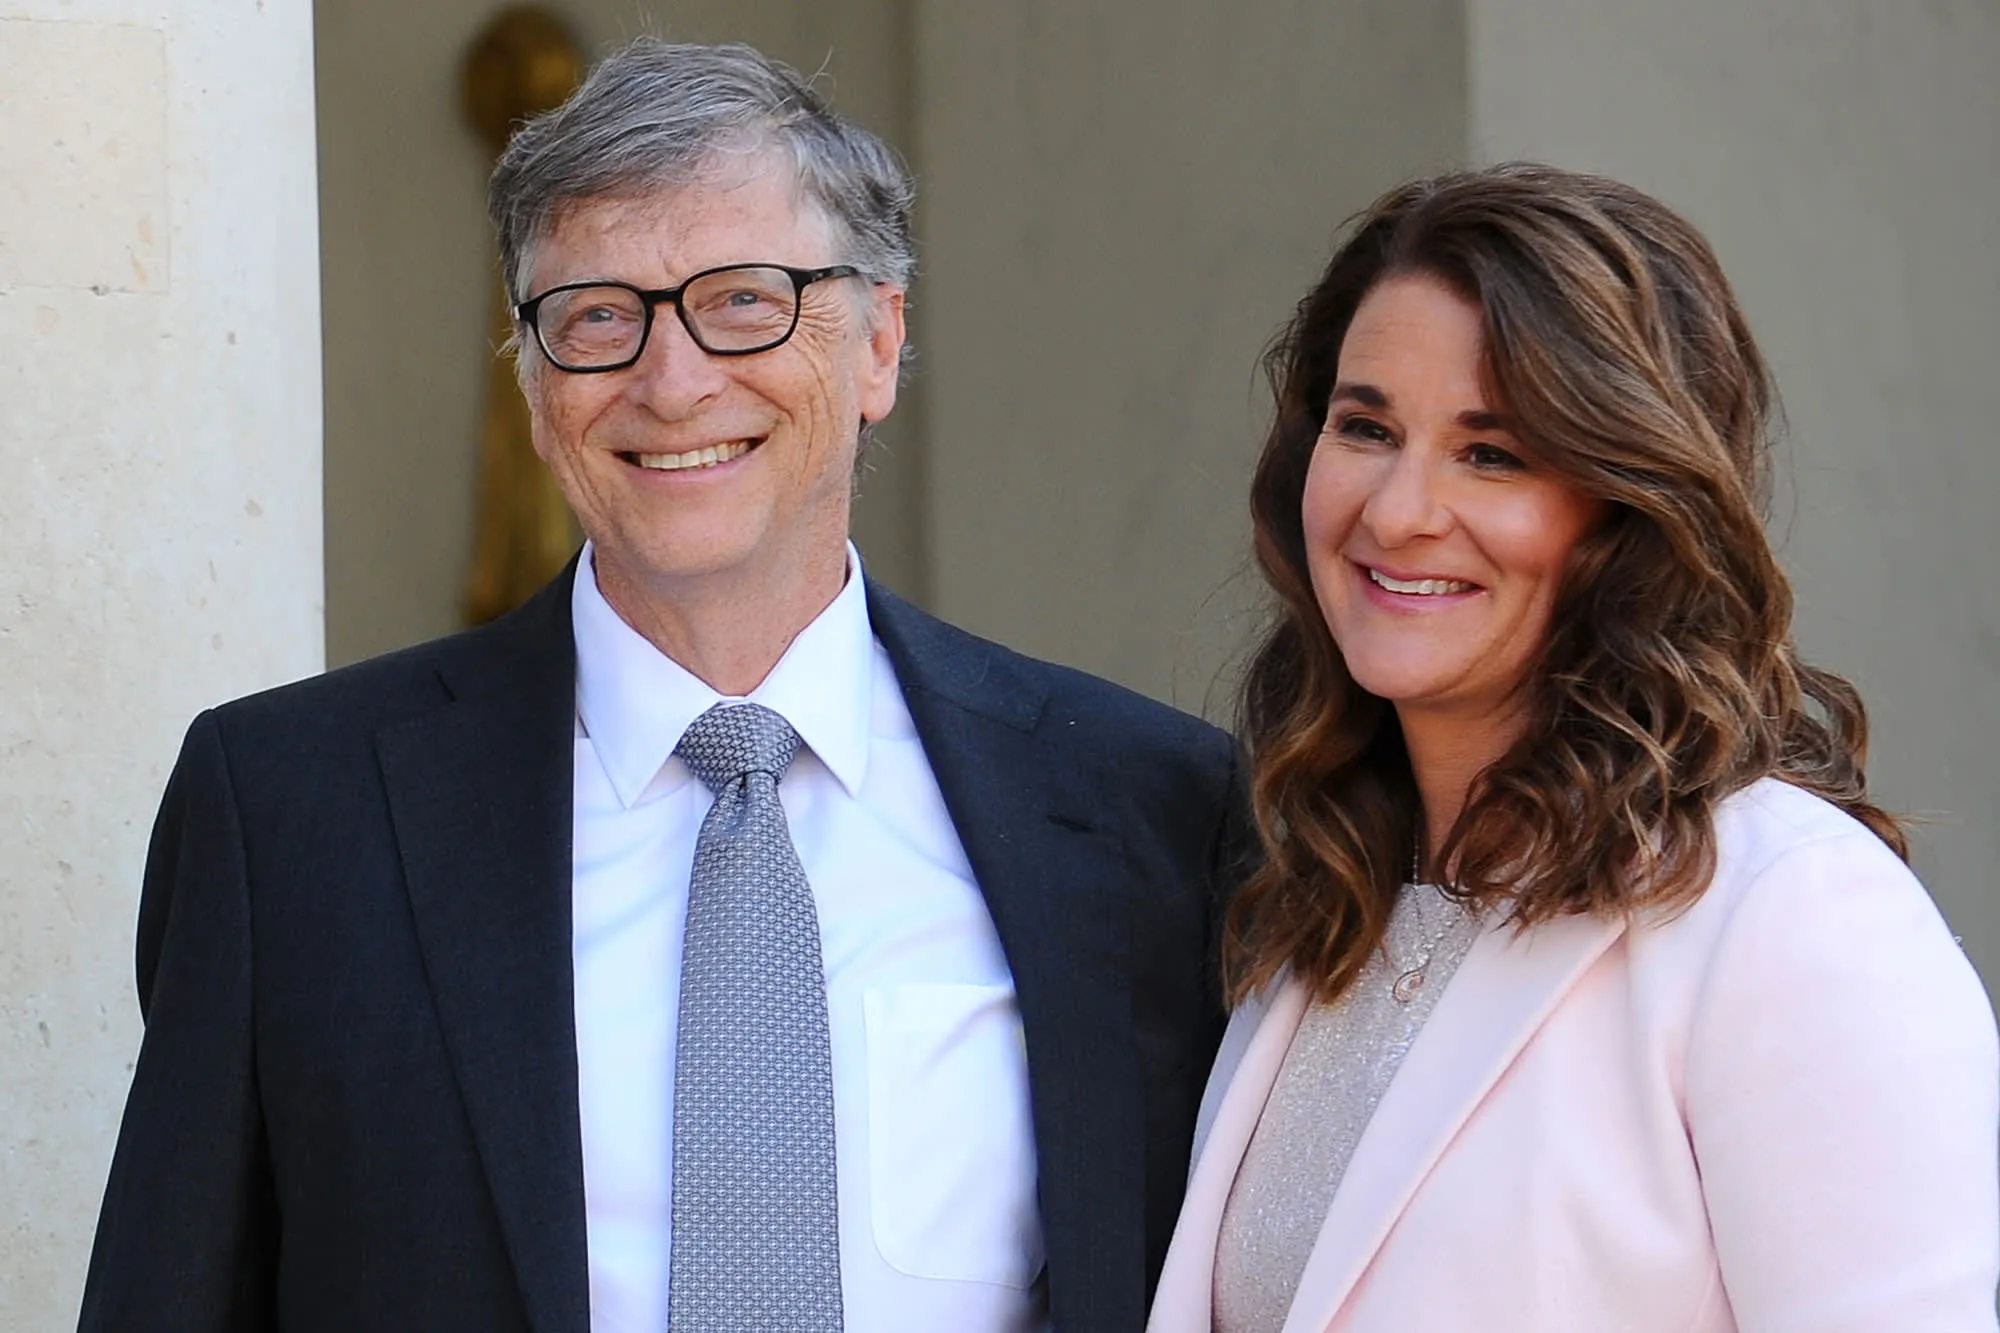 After 27 years of marriage, the co-founder of Microsoft Bill Gates and Melinda Gates announced their divorce on Tuesday. 